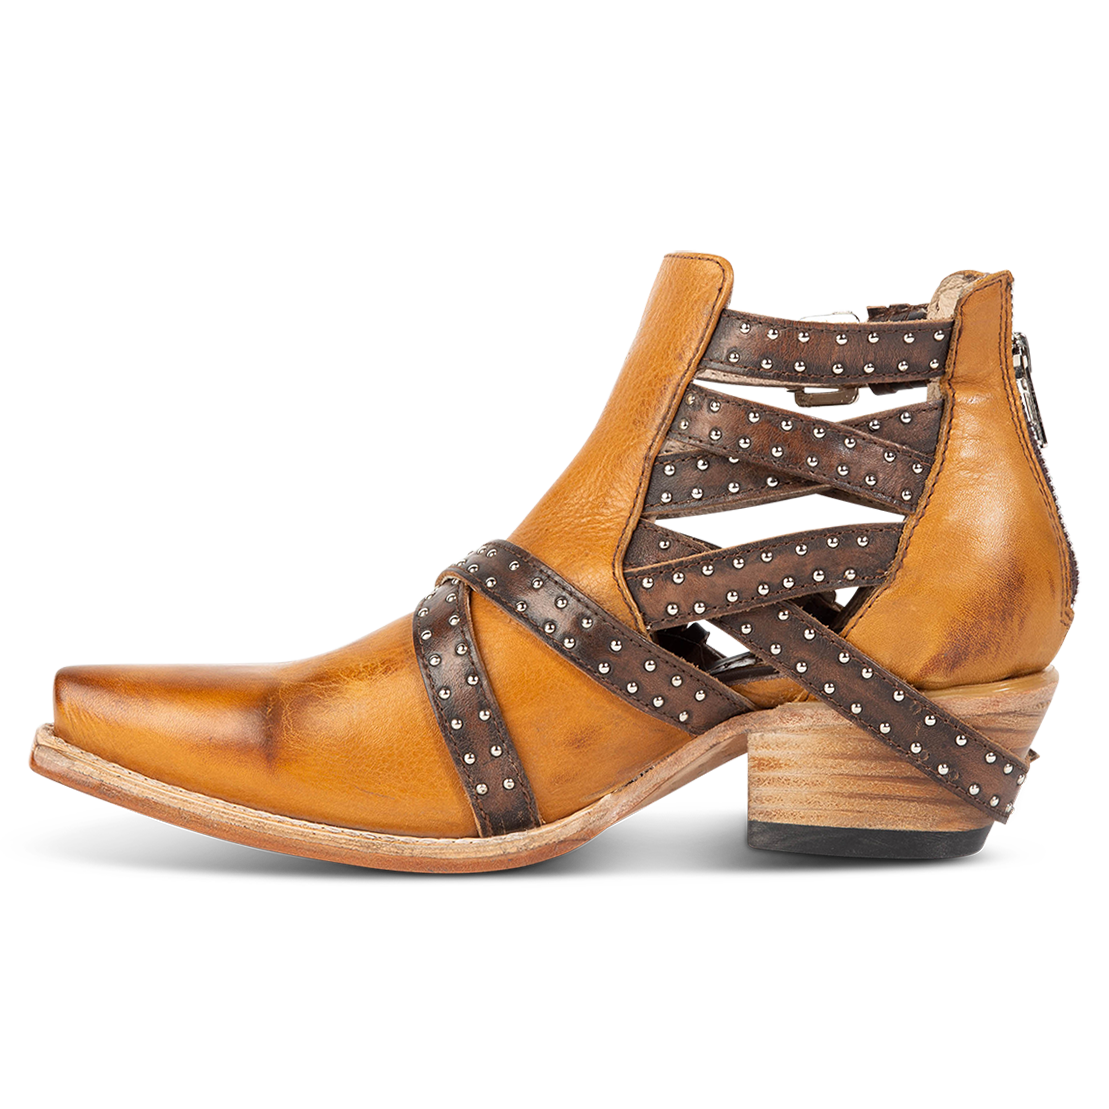 Inside view showing adjustable buckle straps and exposed sides on FREEBIRD women's Wasp wheat ankle bootie